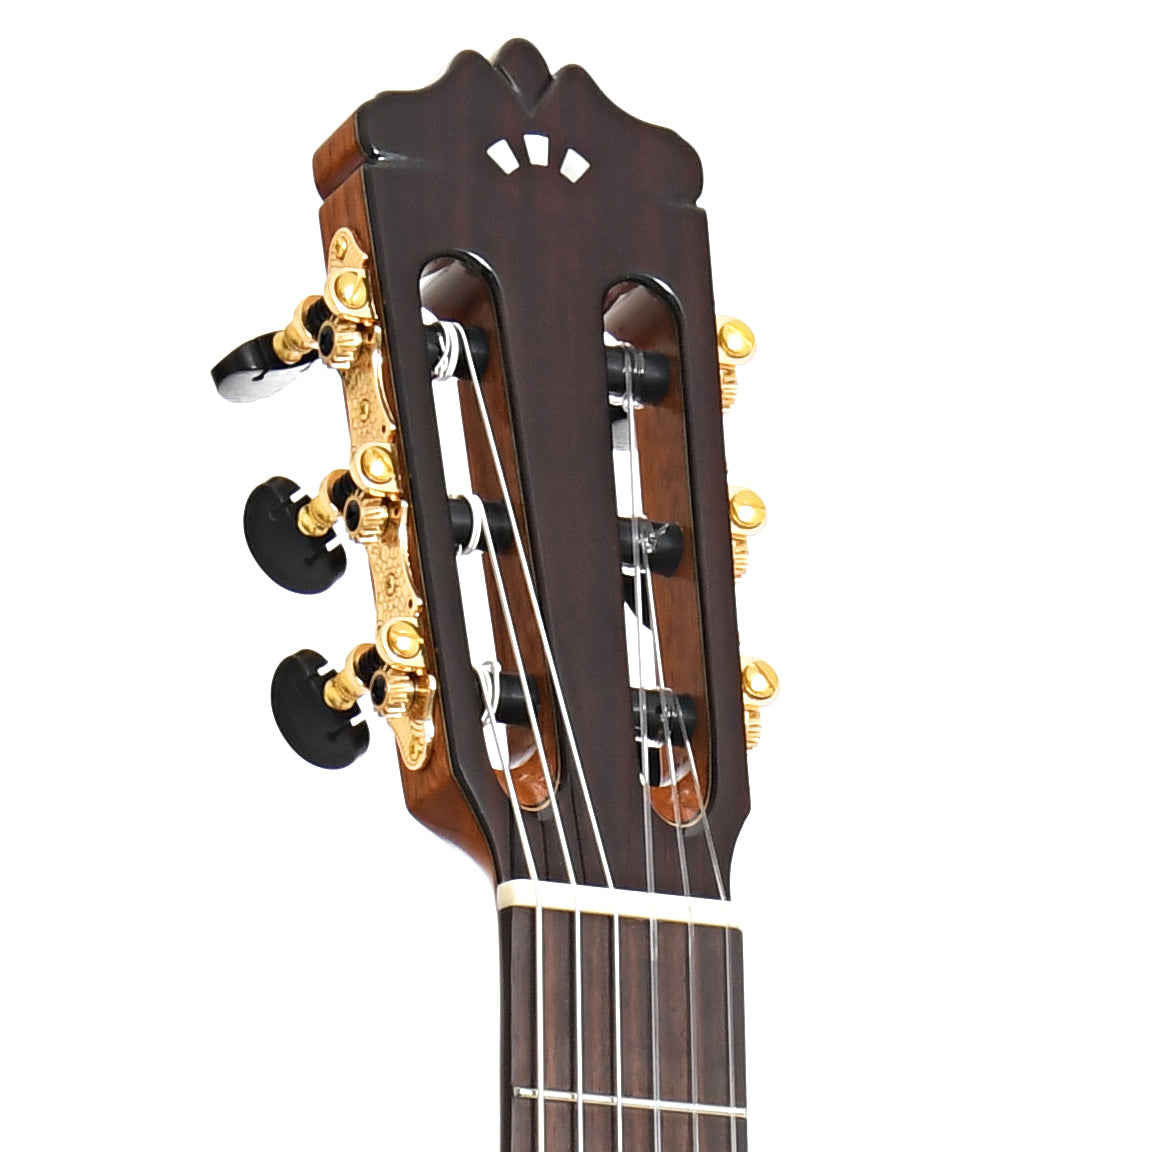 Image 8 of Cordoba C9 Parlor Classical Guitar and Case - SKU# CORC9D : Product Type Classical & Flamenco Guitars : Elderly Instruments